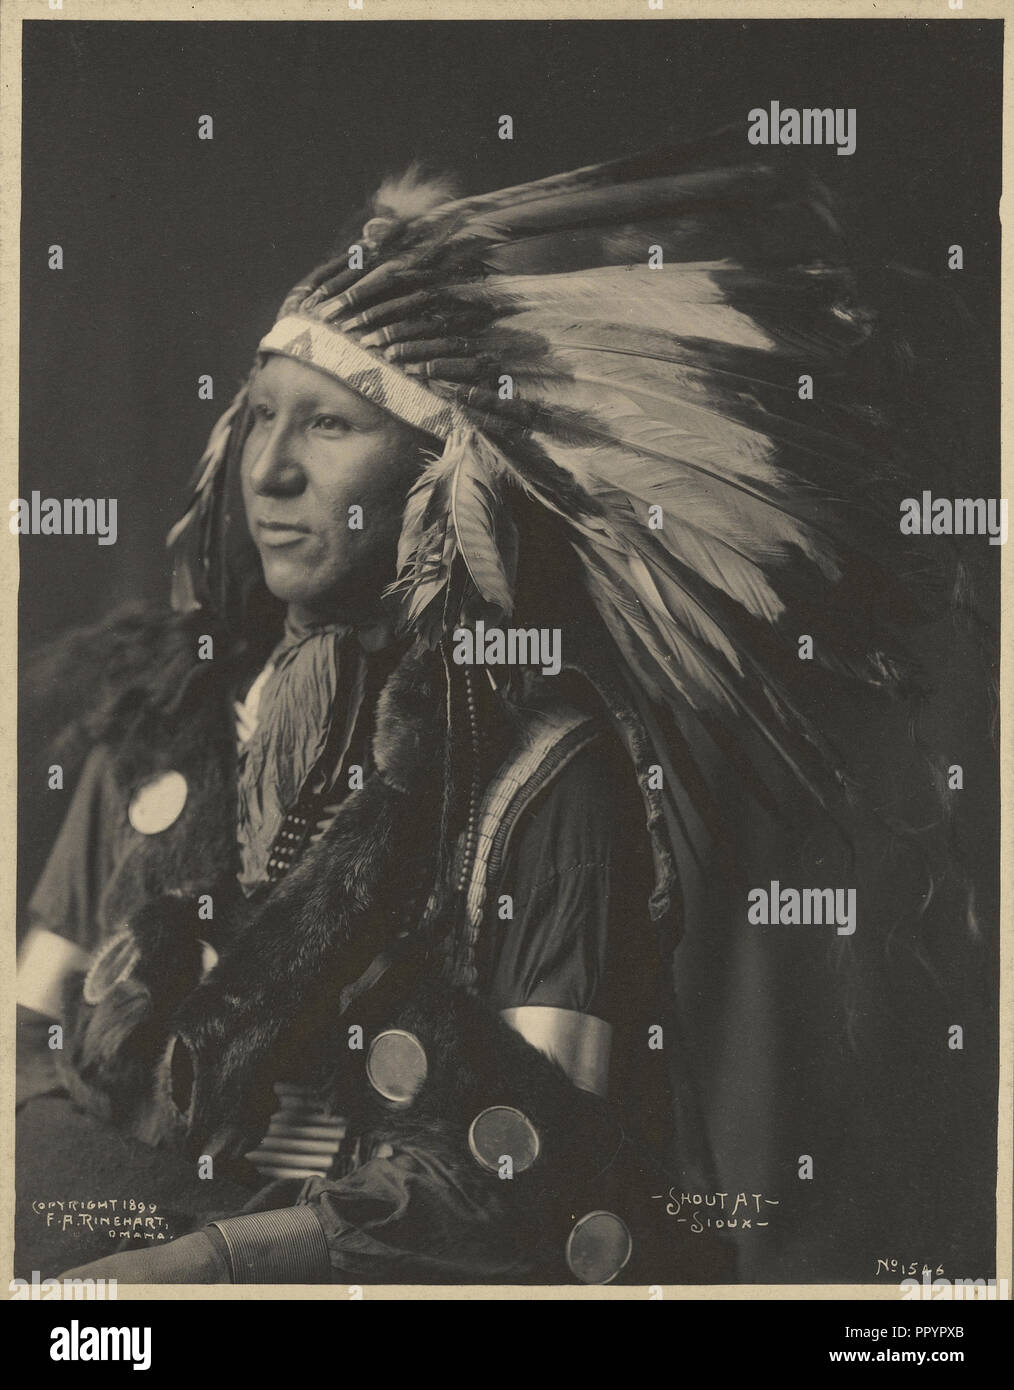 Shout At, Sioux; Adolph F. Muhr, American, died 1913, Frank A. Rinehart, American, 1861 - 1928, 1899; Platinum print Stock Photo